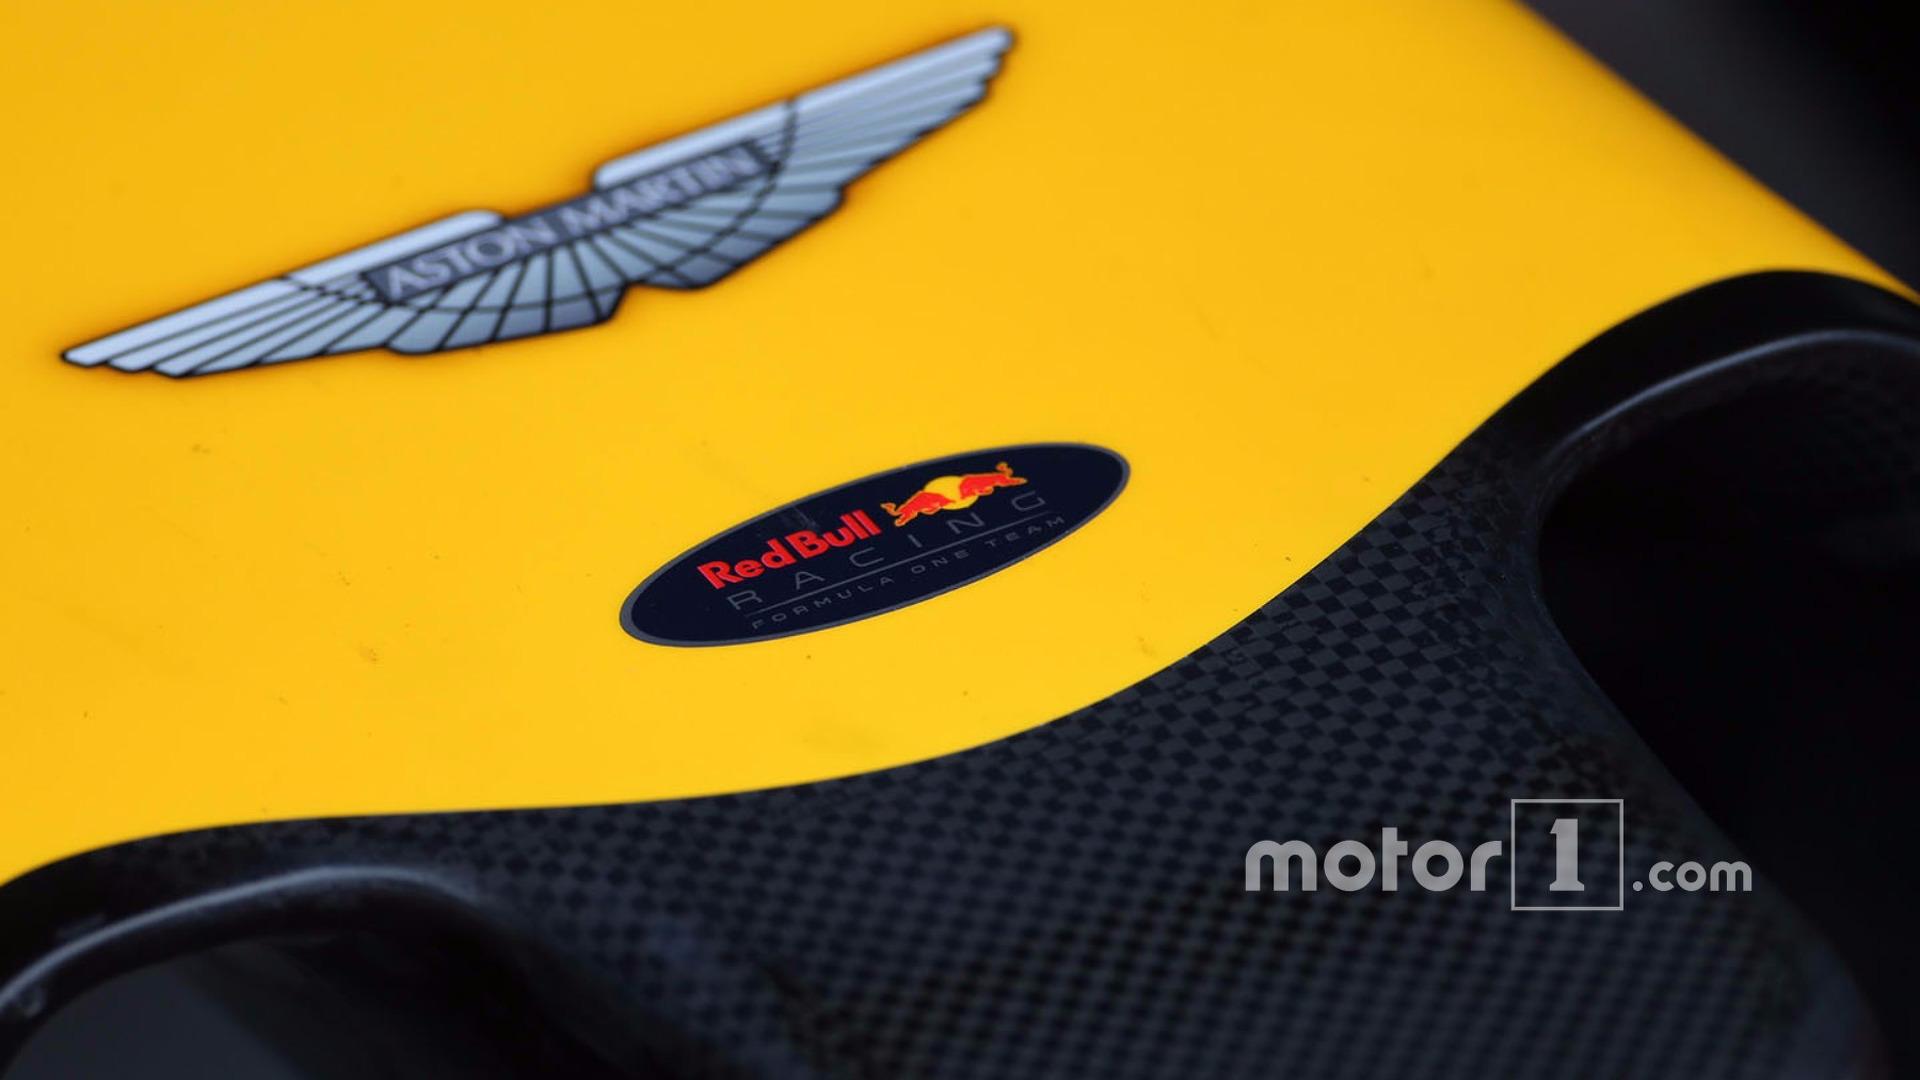 Aston Martin extends sponsorship deal with Red Bull F1 team